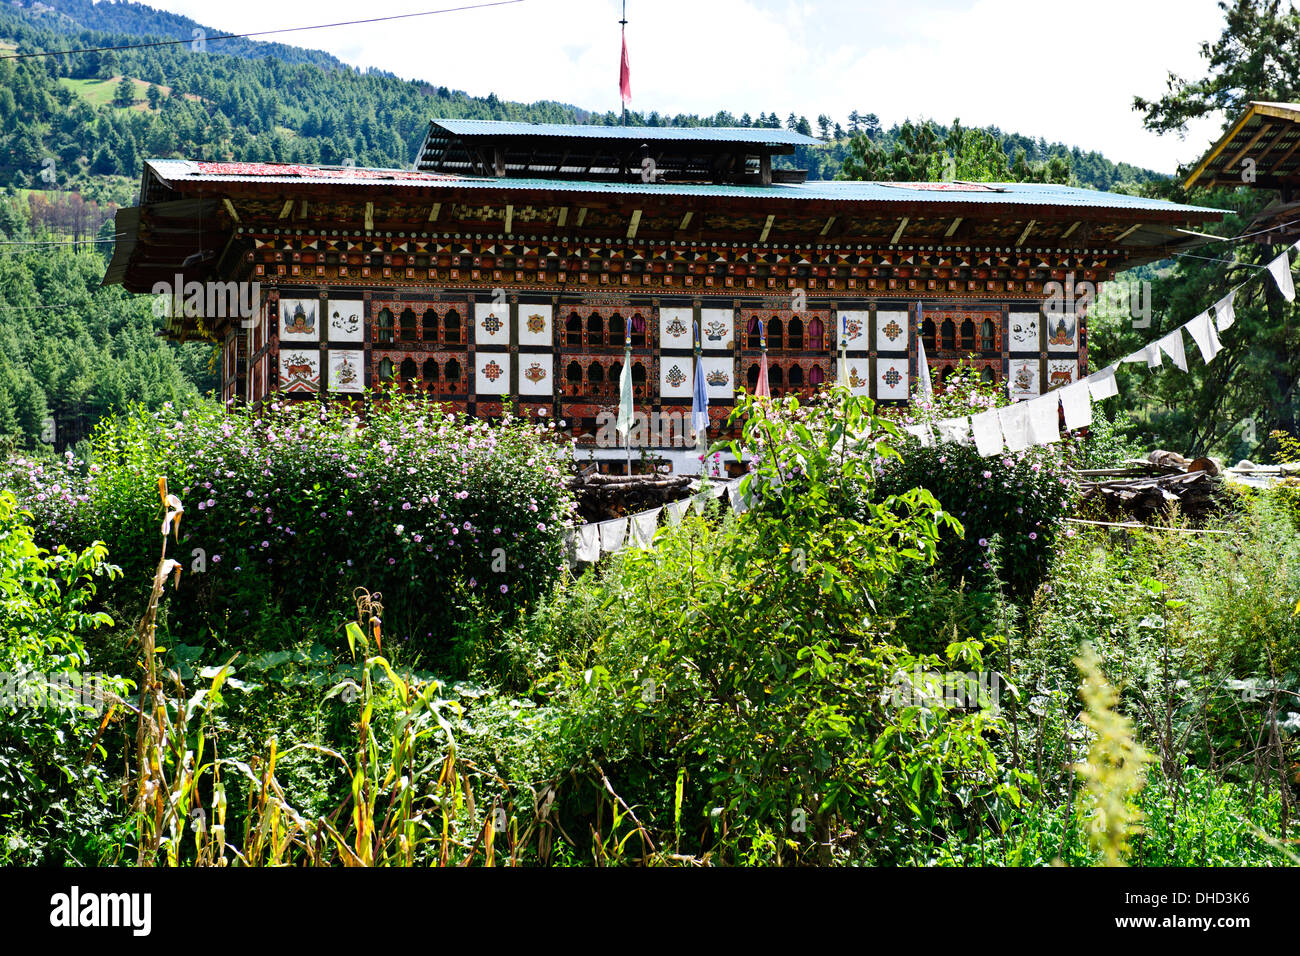 Traditional houses,wall paintings such as large red phallus symbols,animals by colorfully adorned wooden window frames,Bhutan Stock Photo